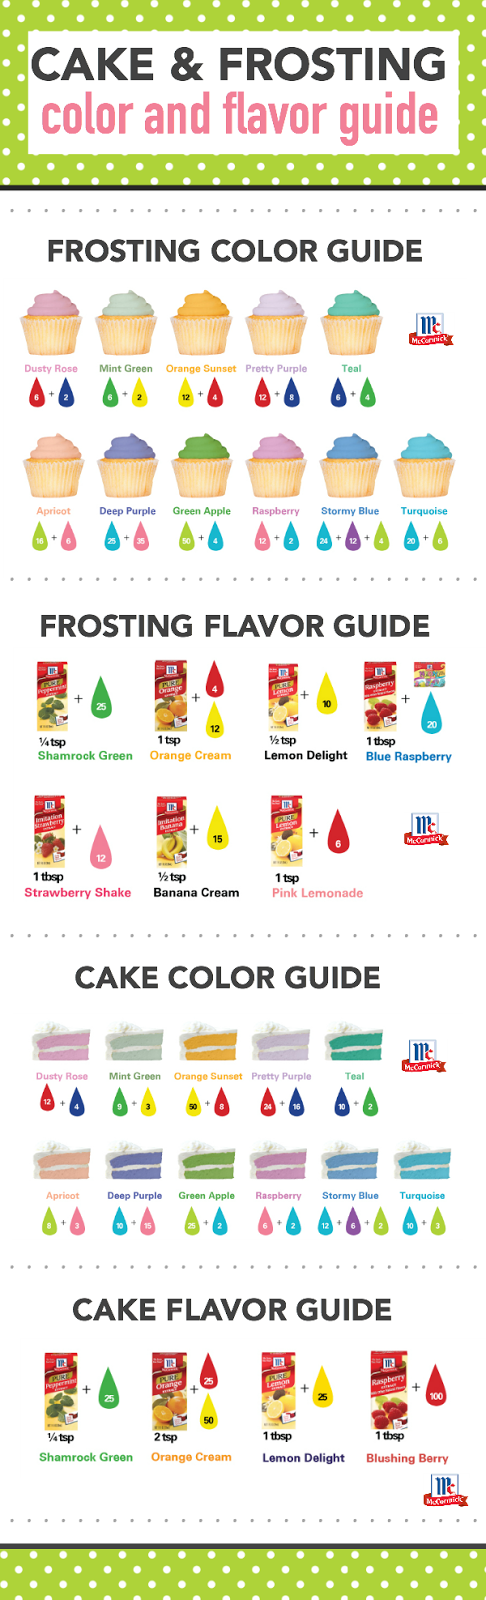 Cake and Frosting coloring and flavoring guide